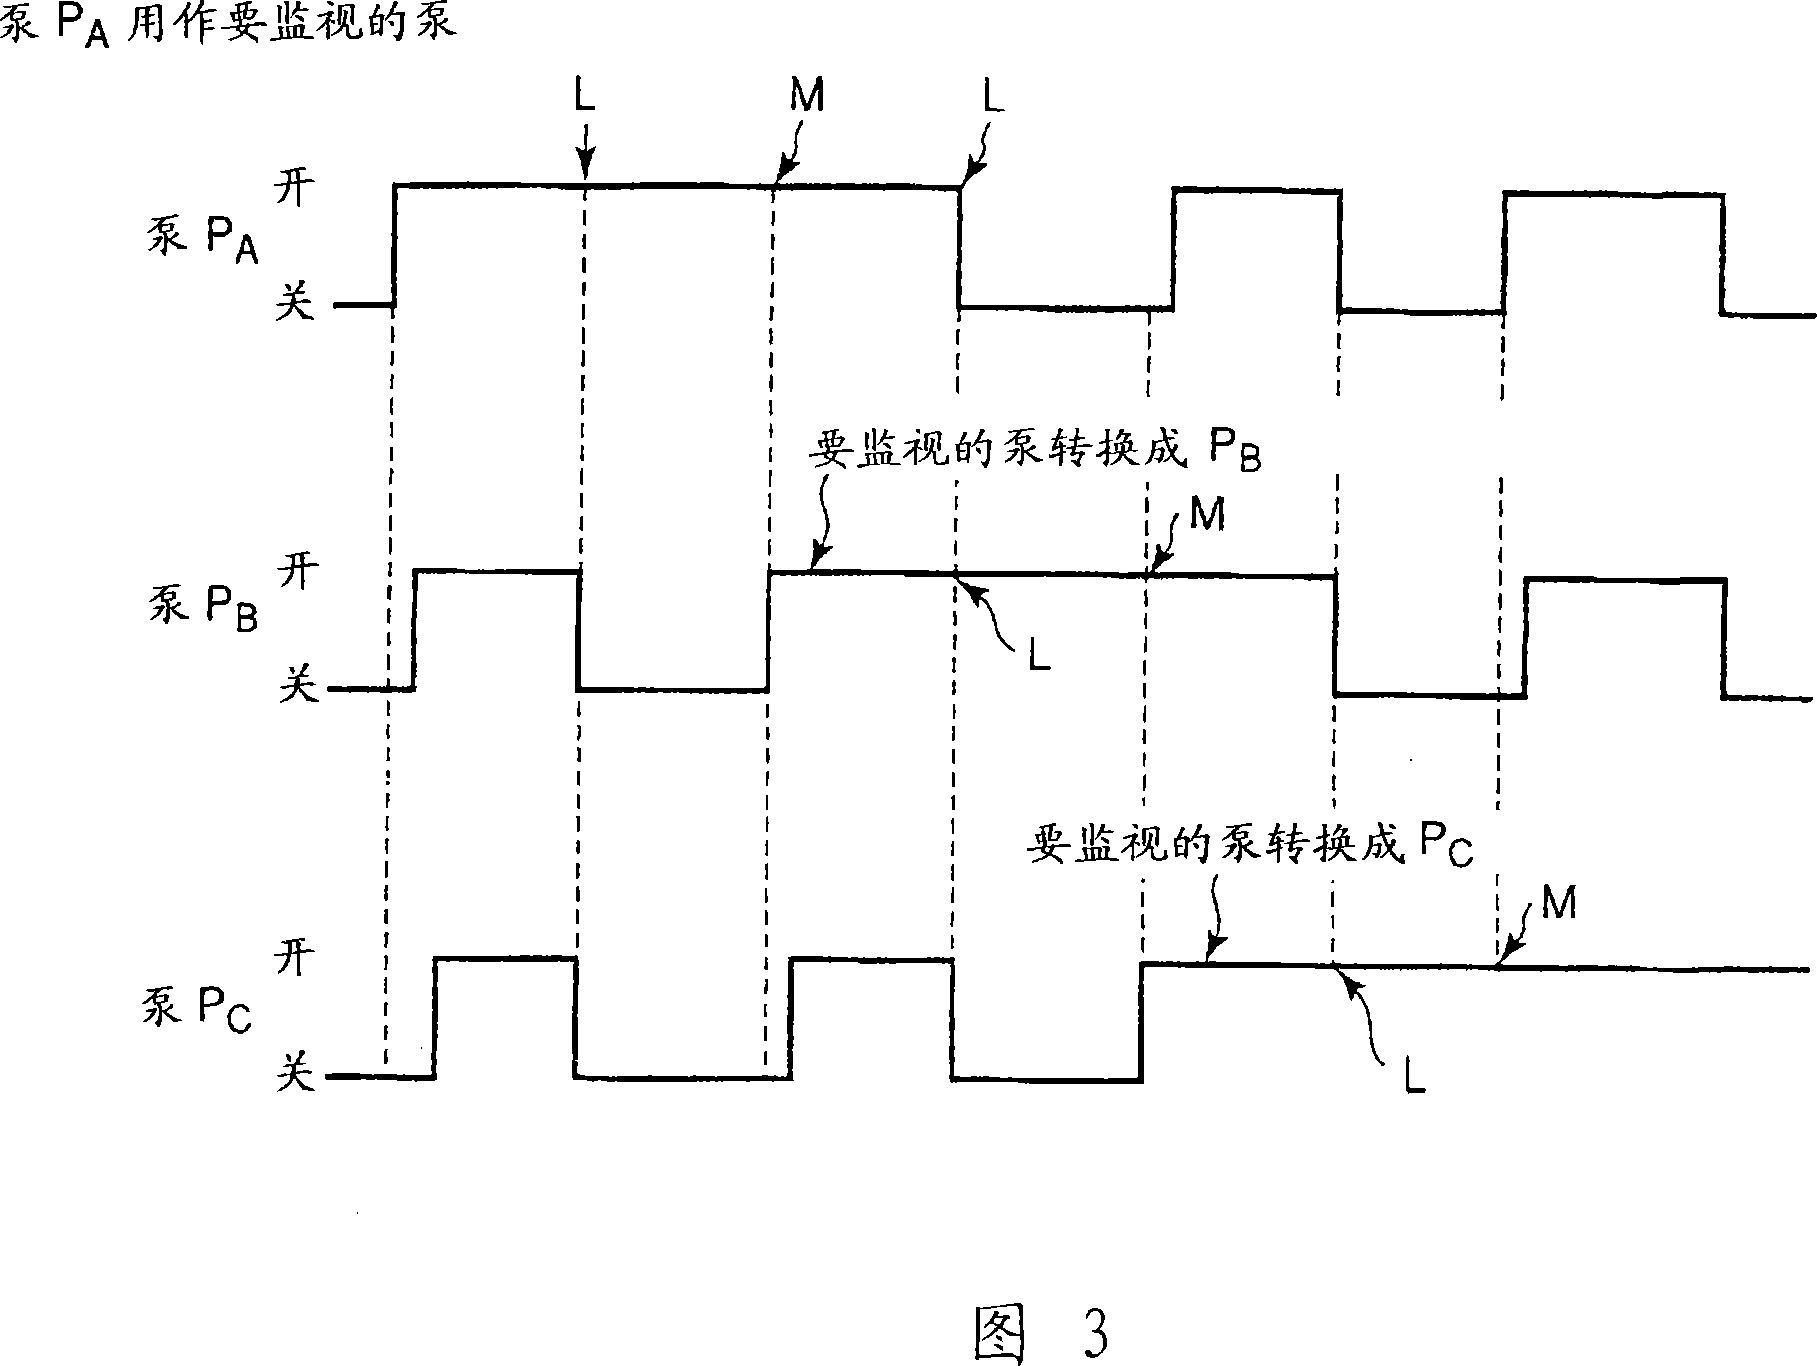 Operation control device and method of vacuum pumps